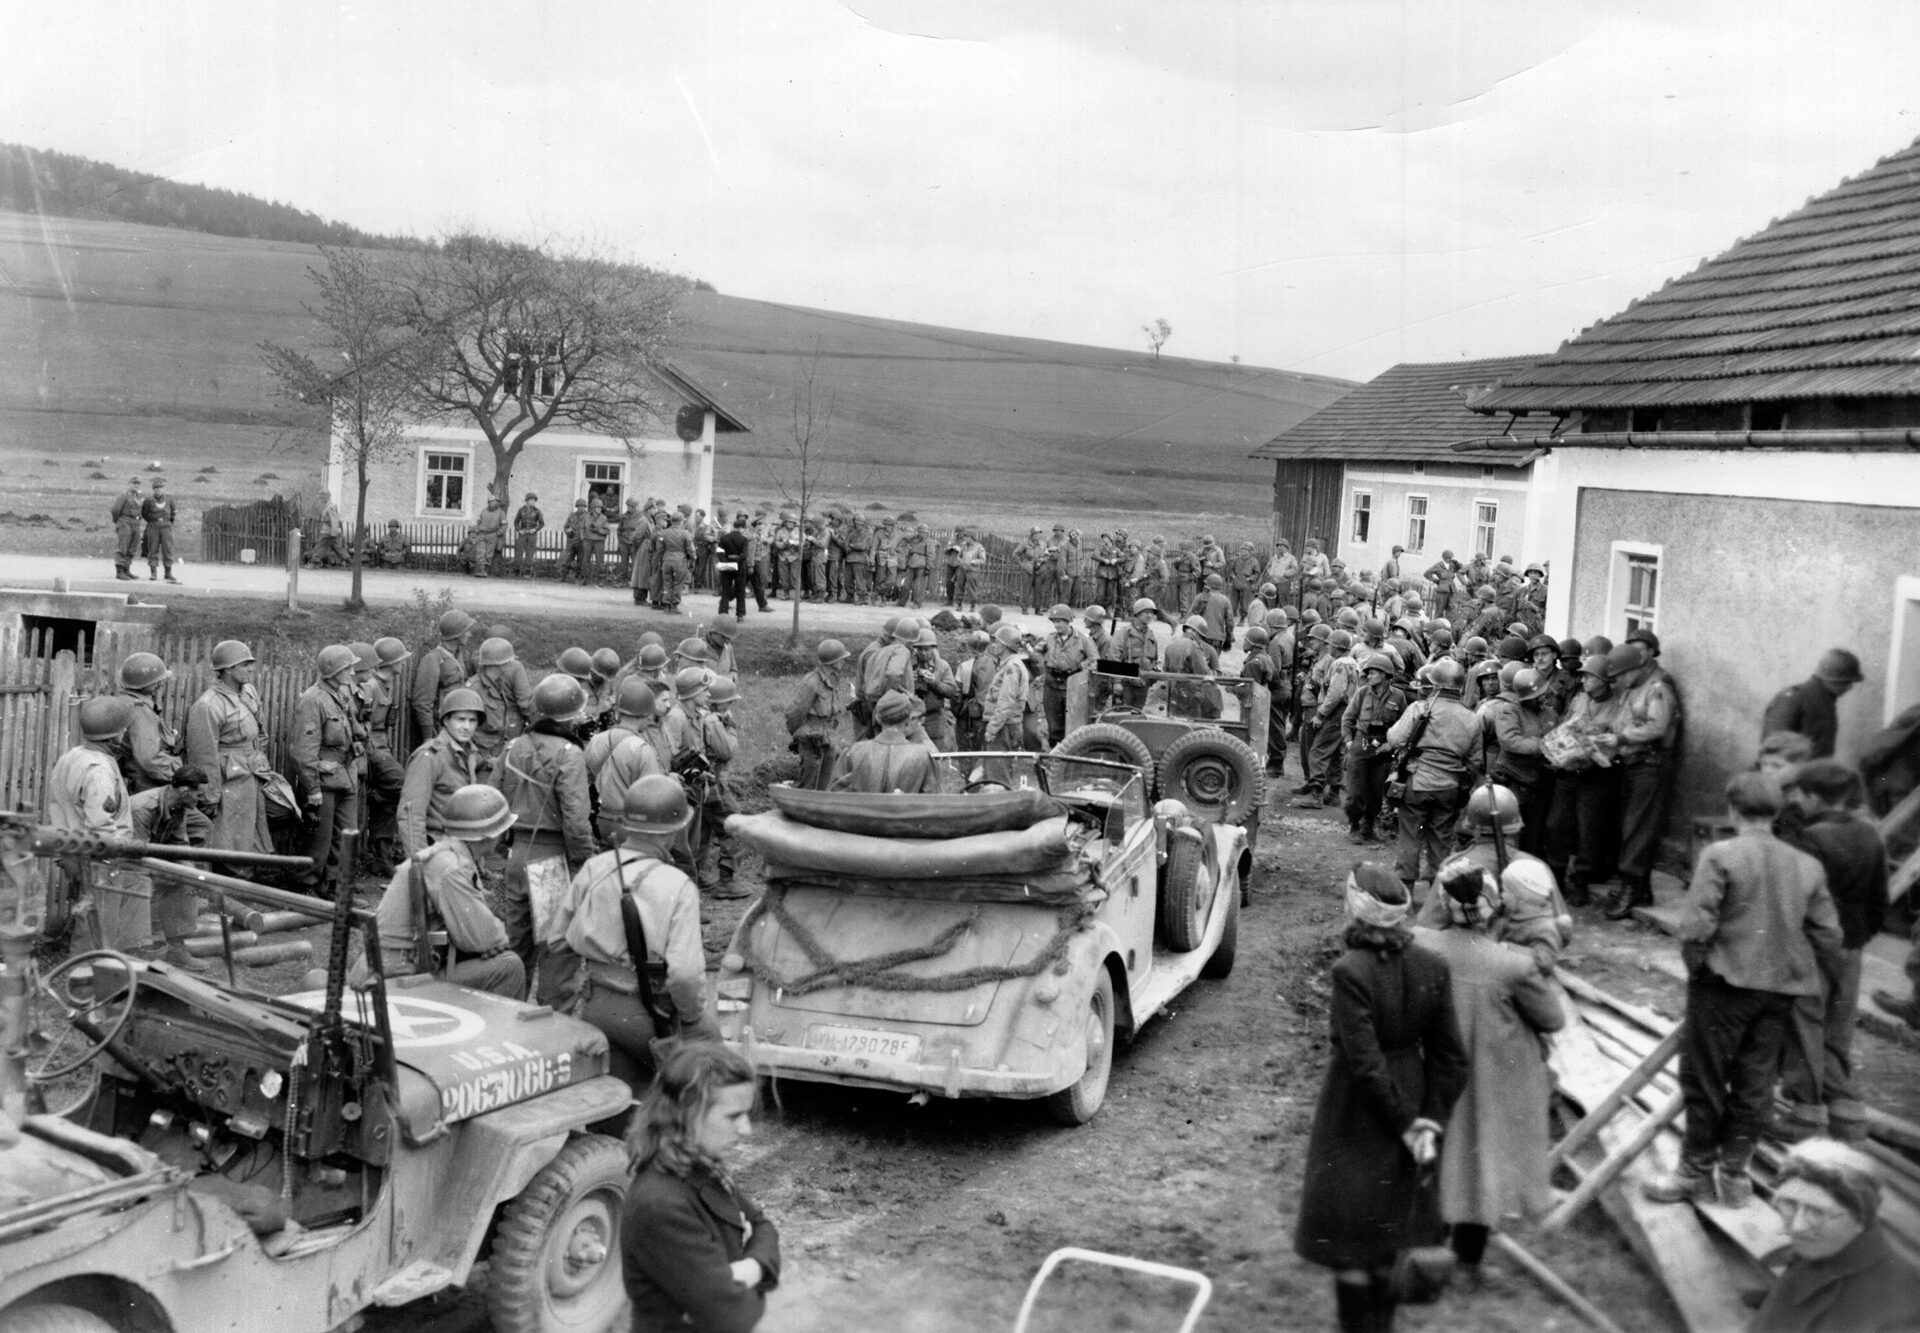 May 4, 1945: Czech civilians and GIs of the 90th Infantry Division’s 359th Infantry Regiment gather near Vseruby in the Pilsen region to witness the formal surrender of Maj. Gen. Wend von Weitersheim, commander of the 11th Panzer (“Ghost”) Division. The author’s father commanded the 359th.